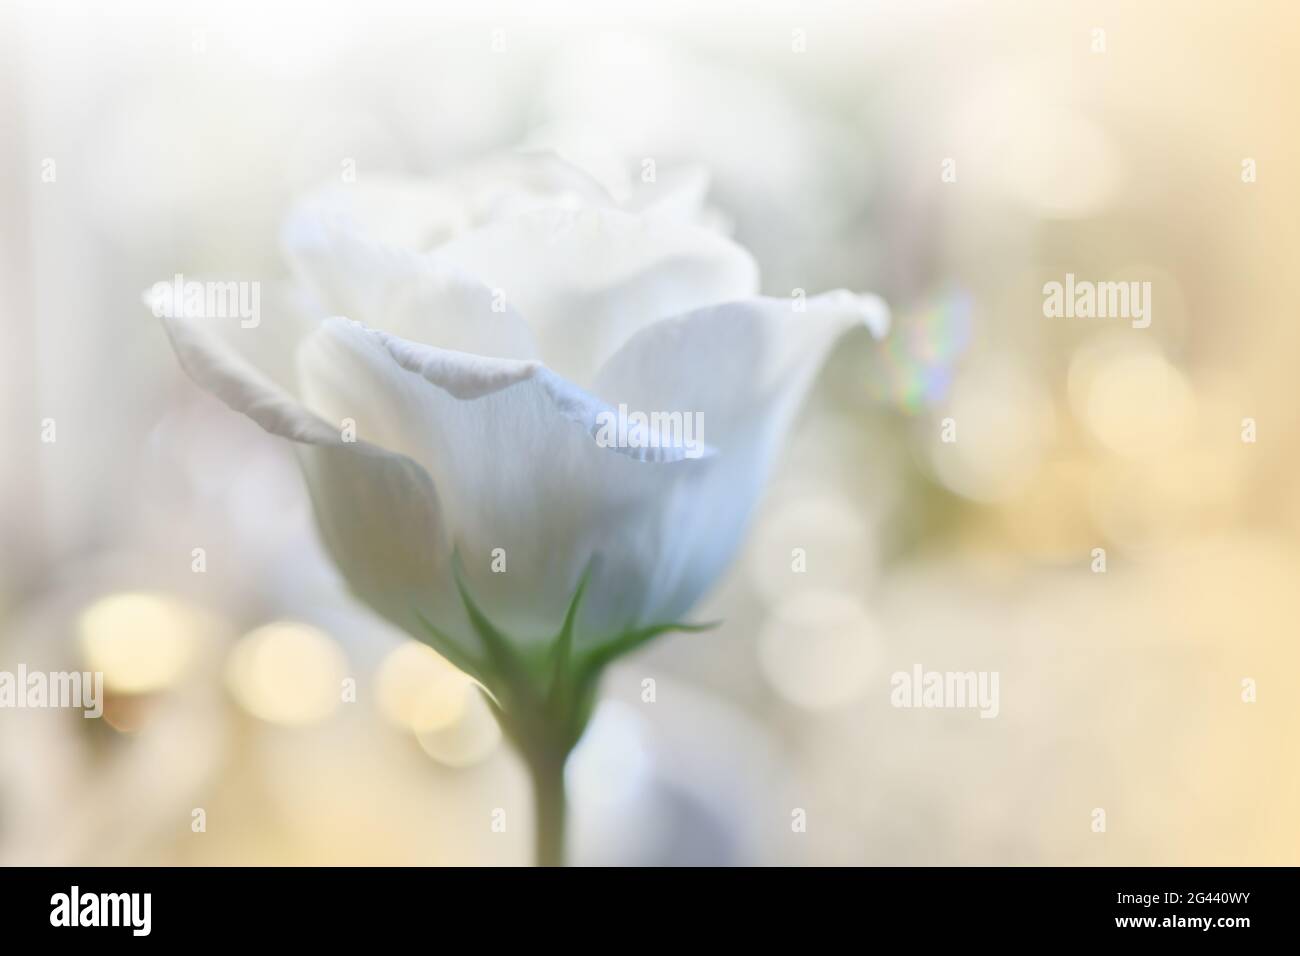 Bella natura background.Floral Art Design.Abstract Macro Photography.White Rose Flower.Pastel. Foto Stock